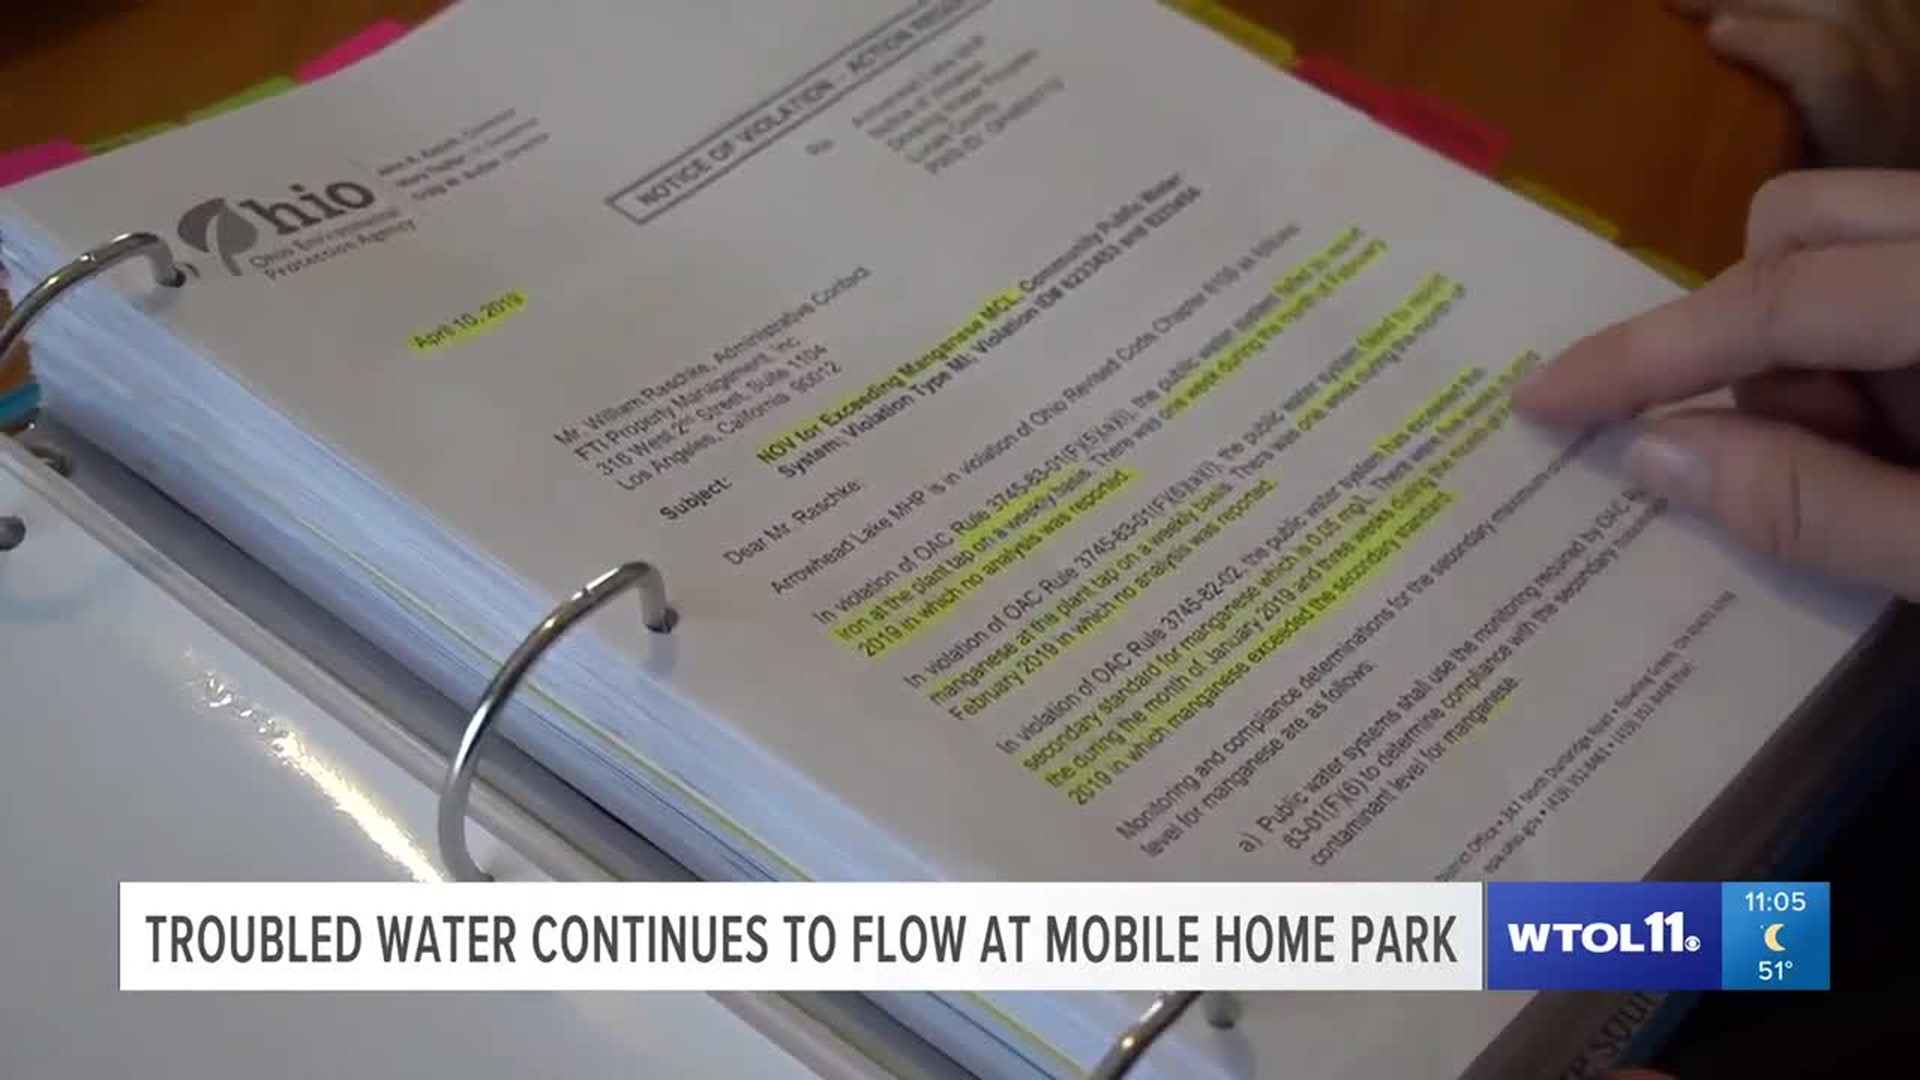 Call 11 for Action: Mobile home neighbors search for answers to water troubles in court